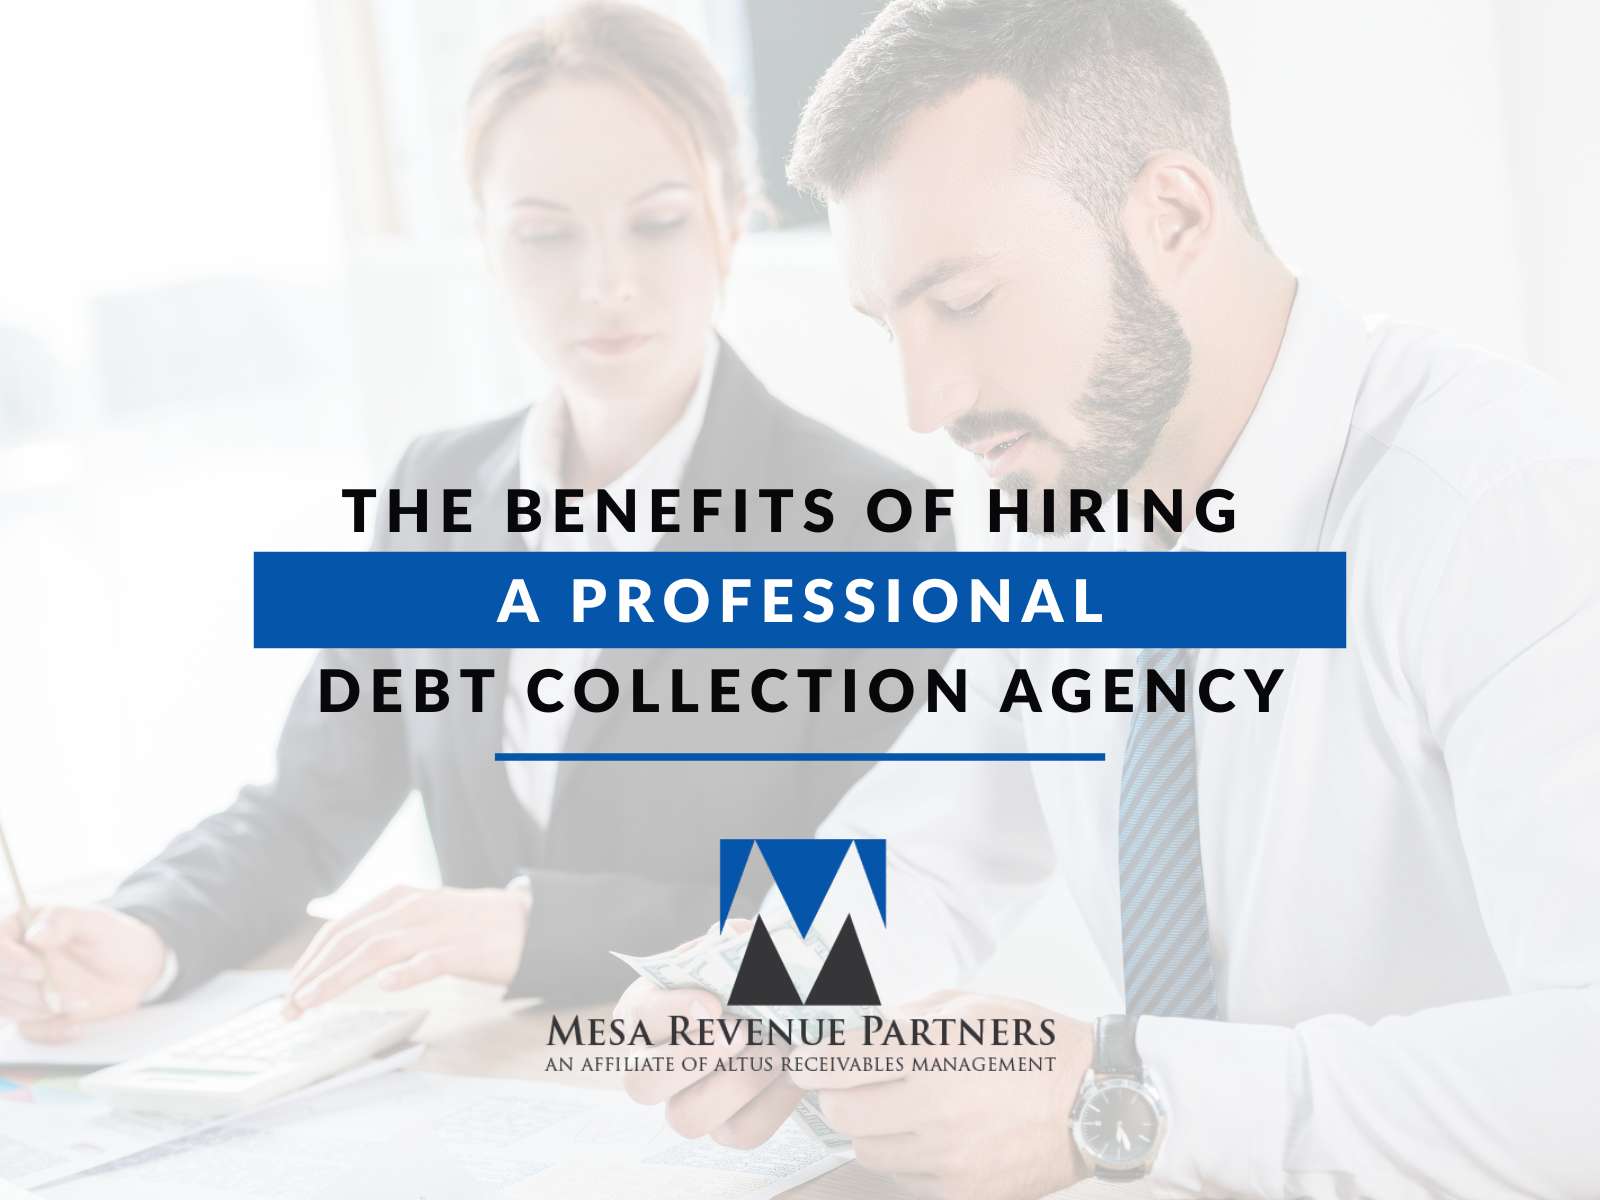 The Benefits of Hiring a Professional Debt Collection Agency